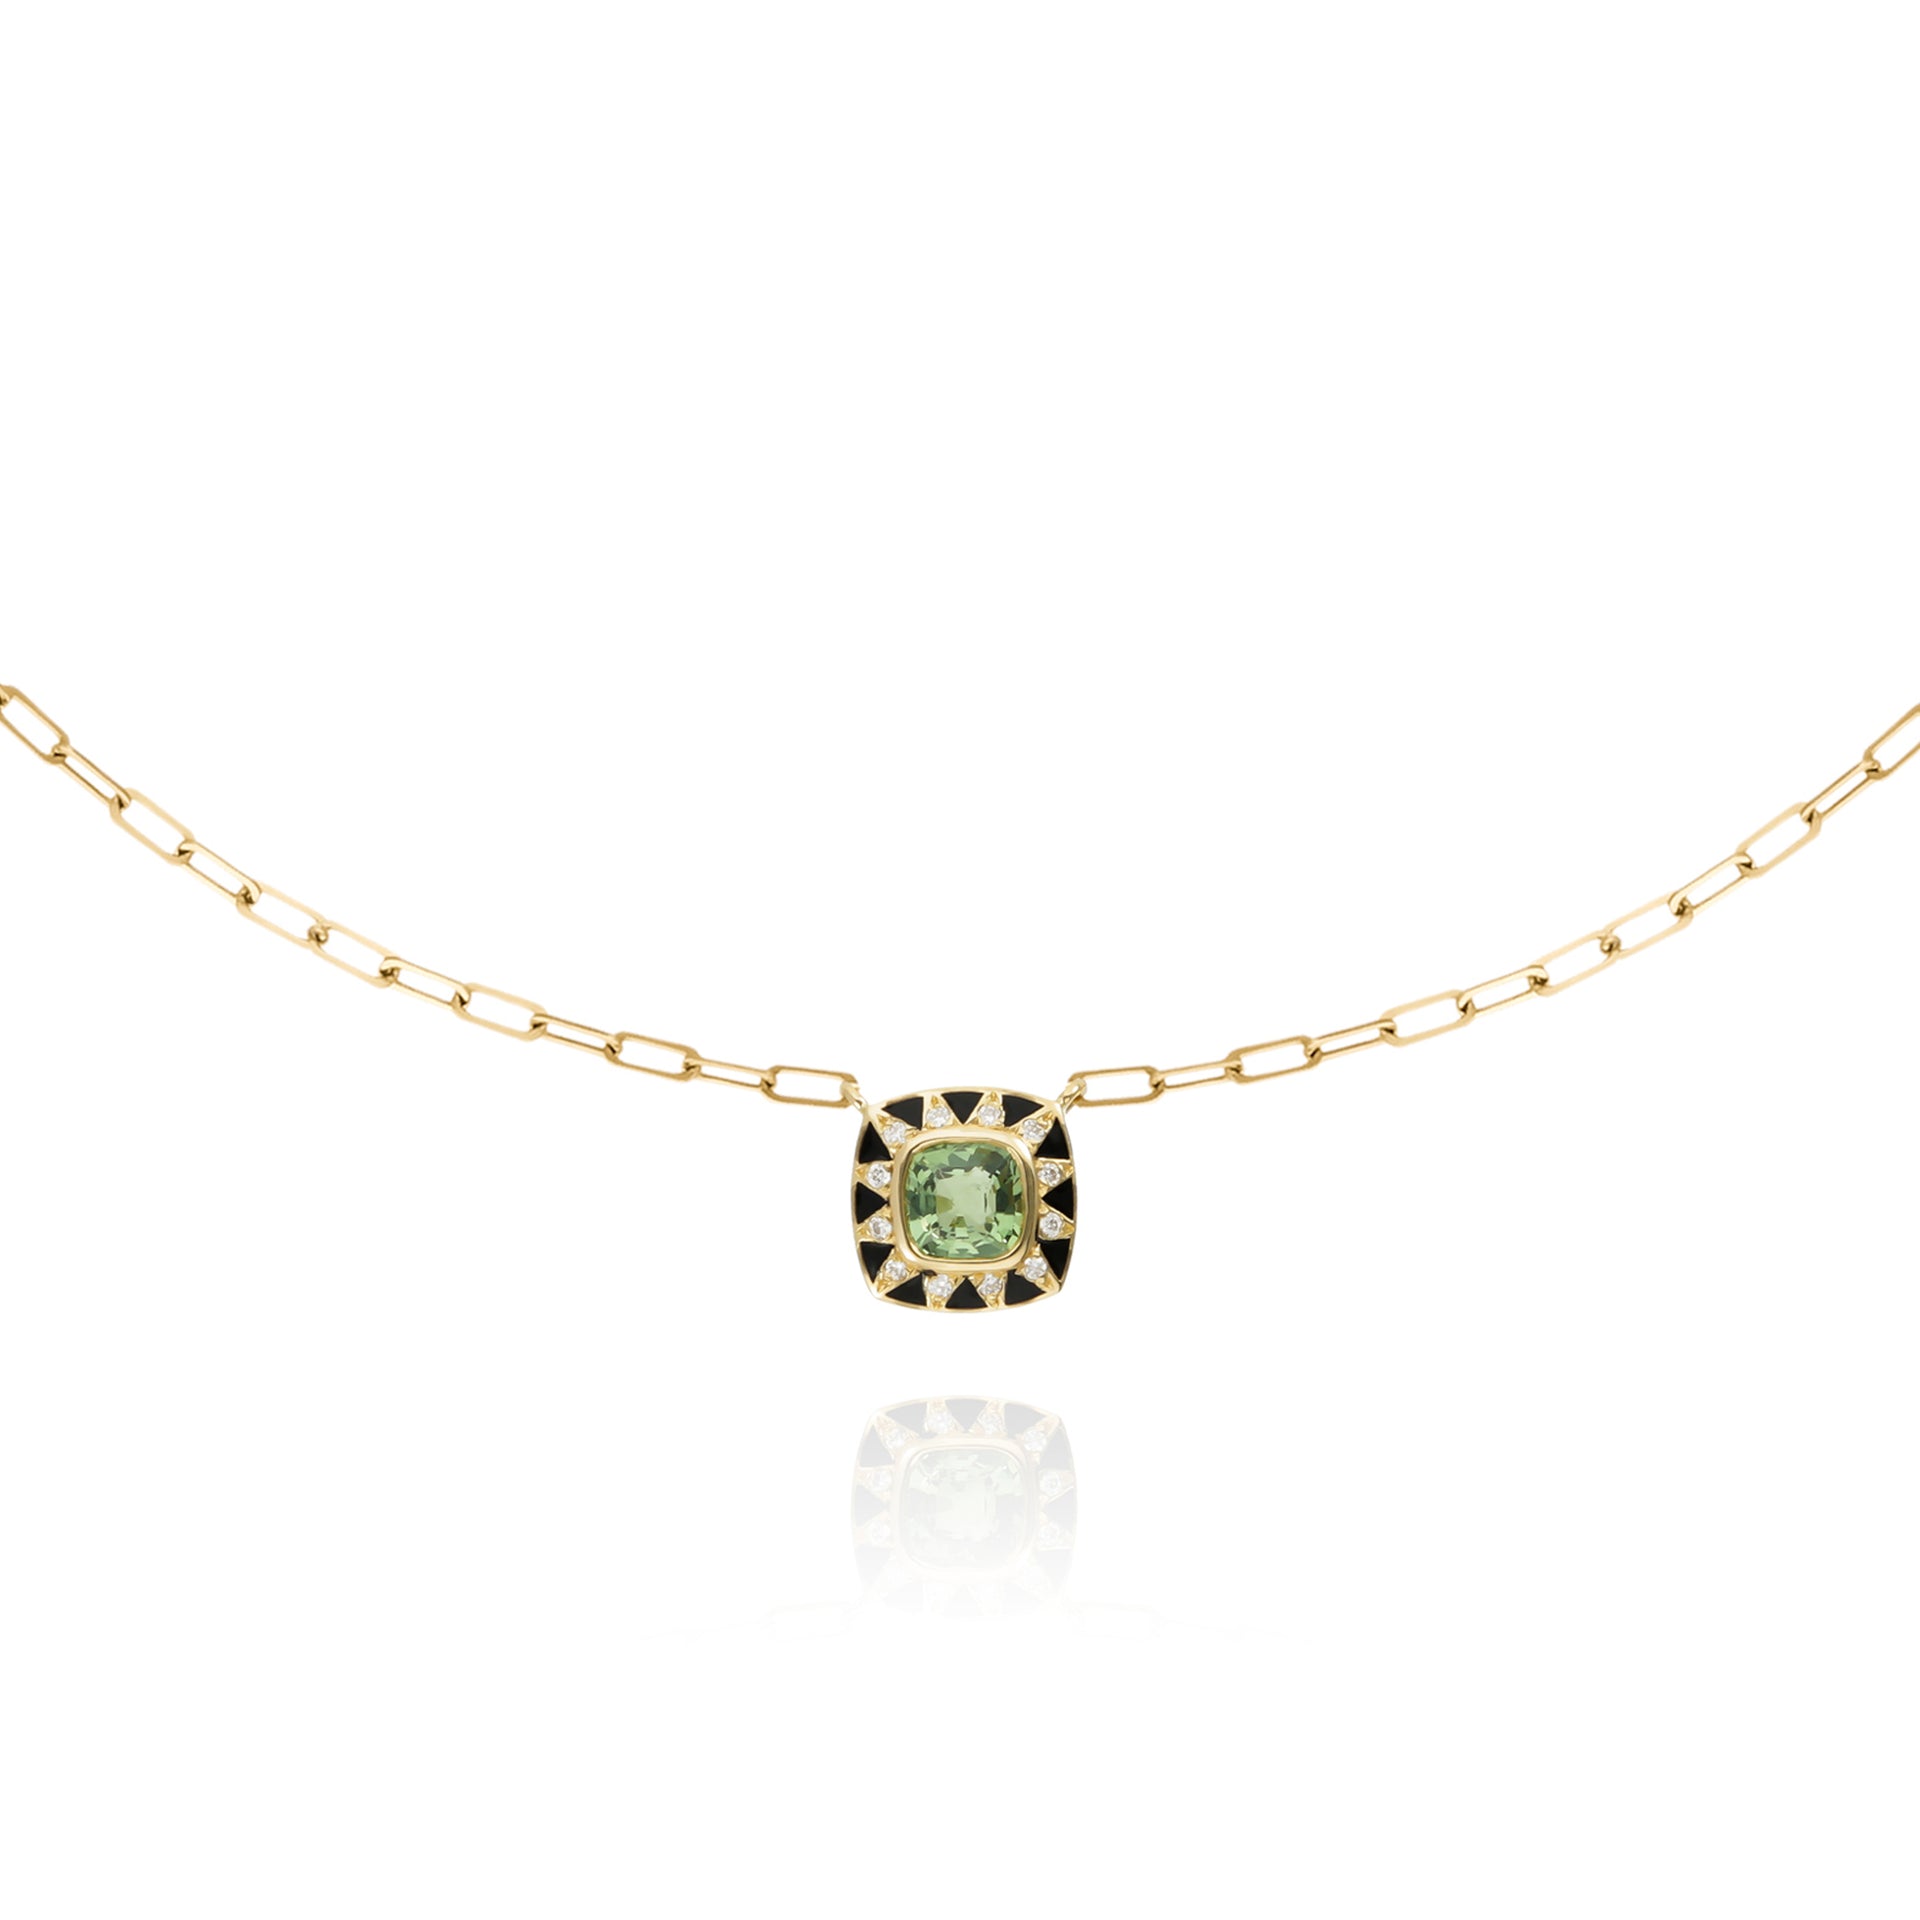 Stella black chain and diamond necklace with green amethyst